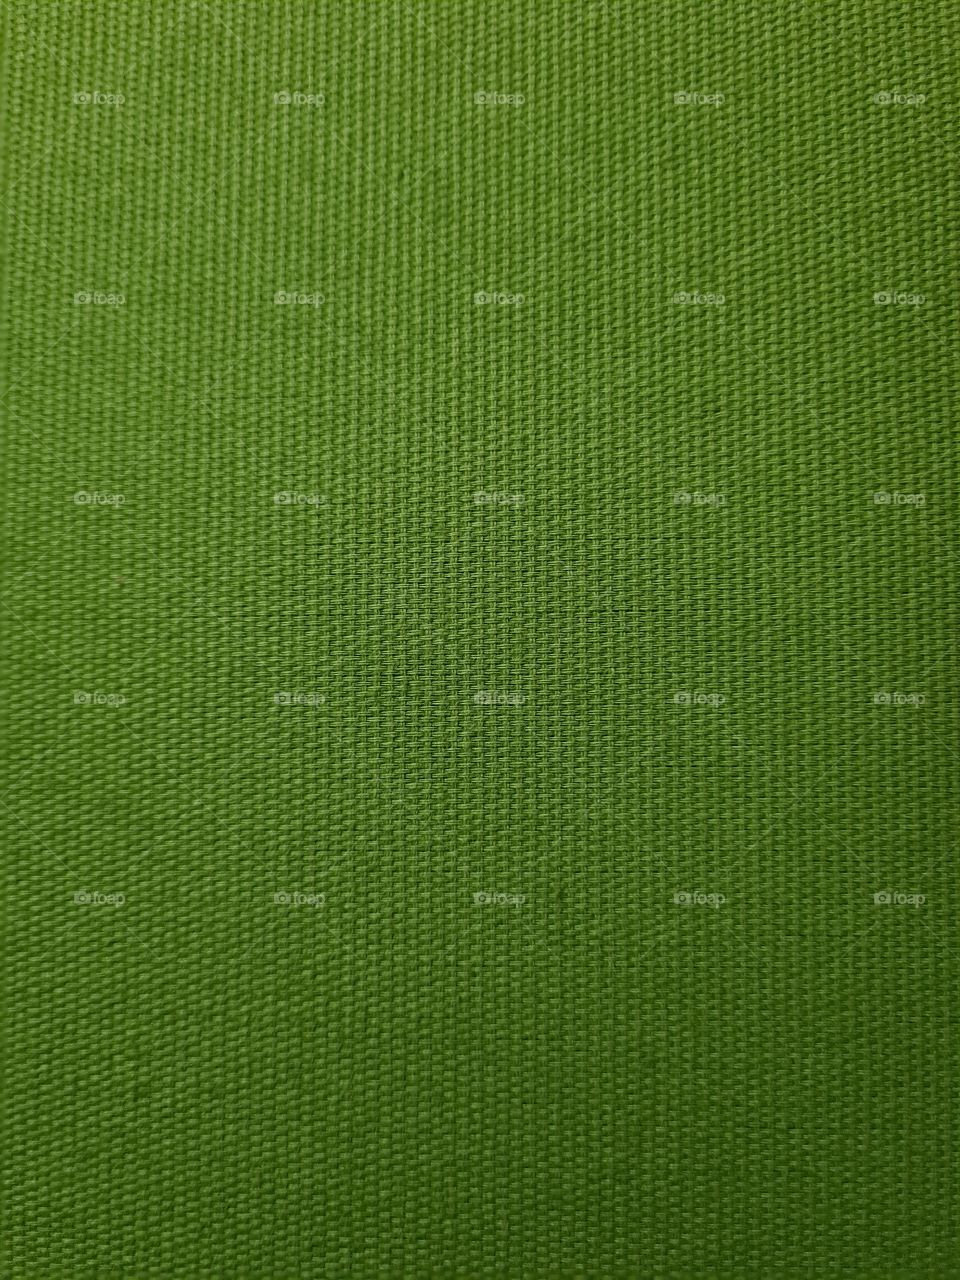 Dark green textile texture of fabric covering a bed's headboard seen from up close.